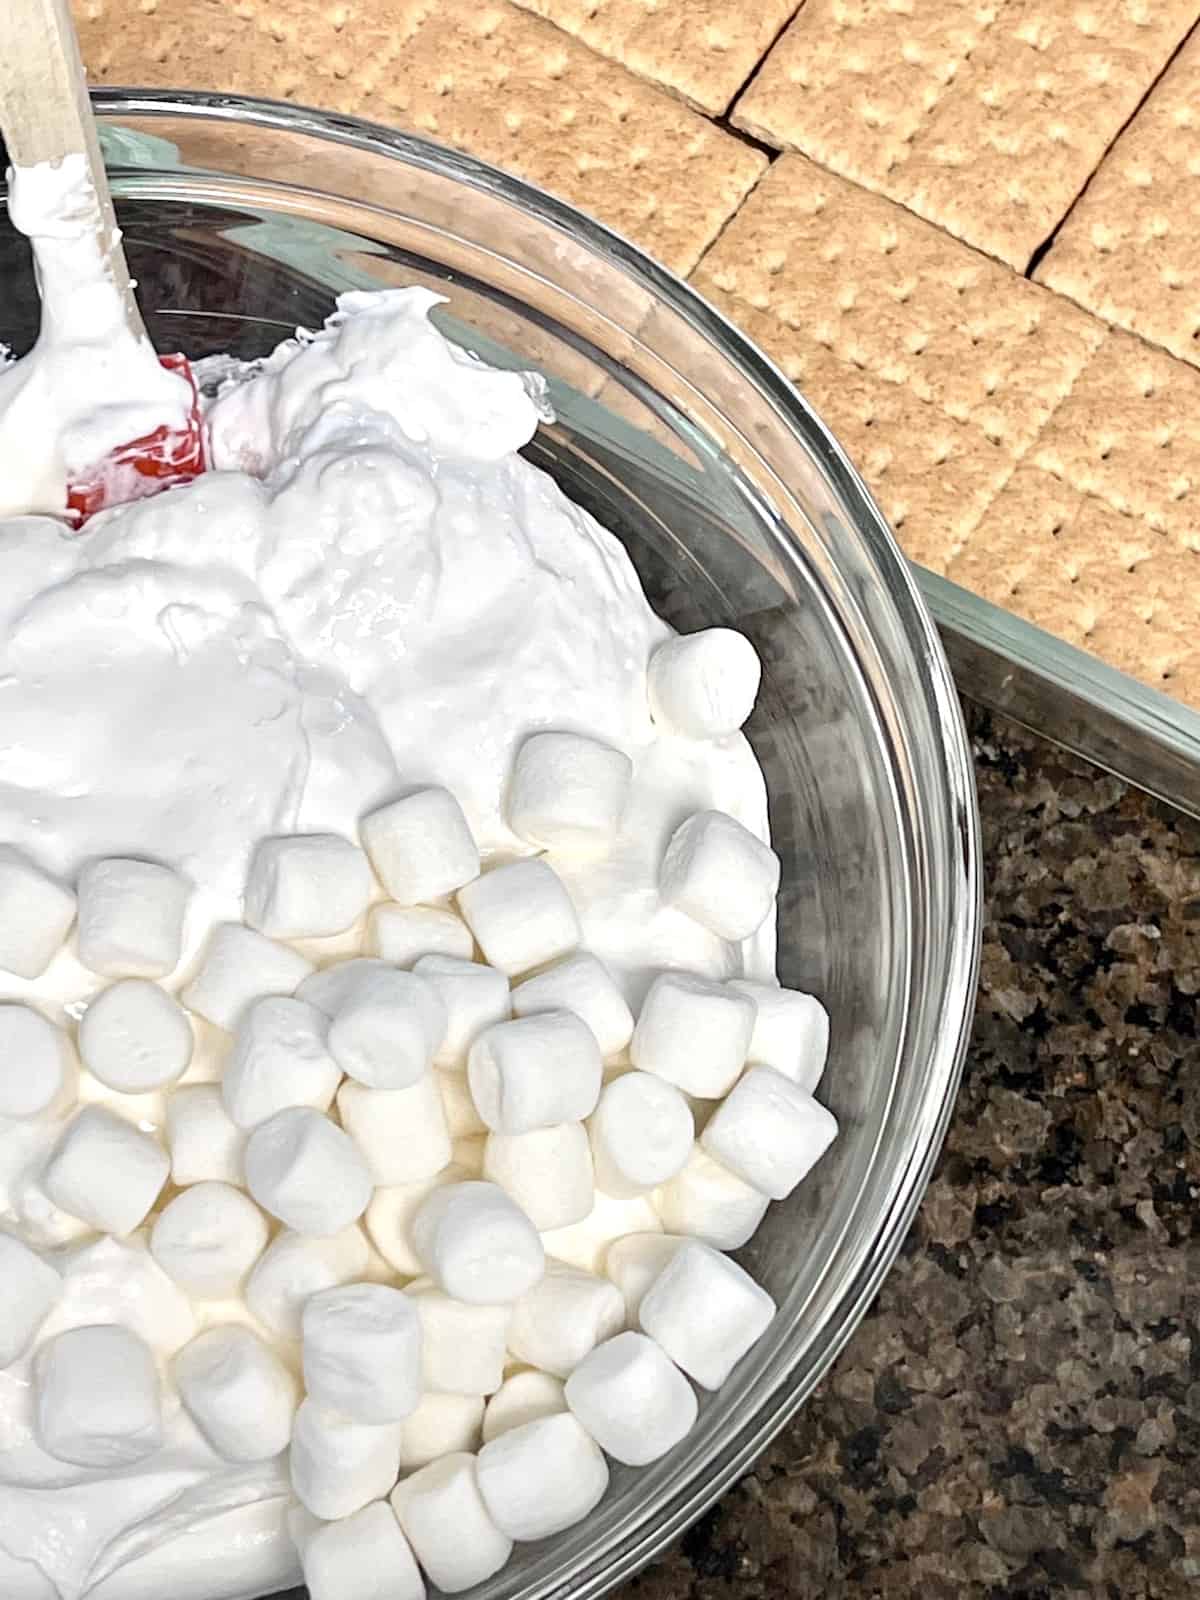 Folding together the marshmallow and coolwhip.